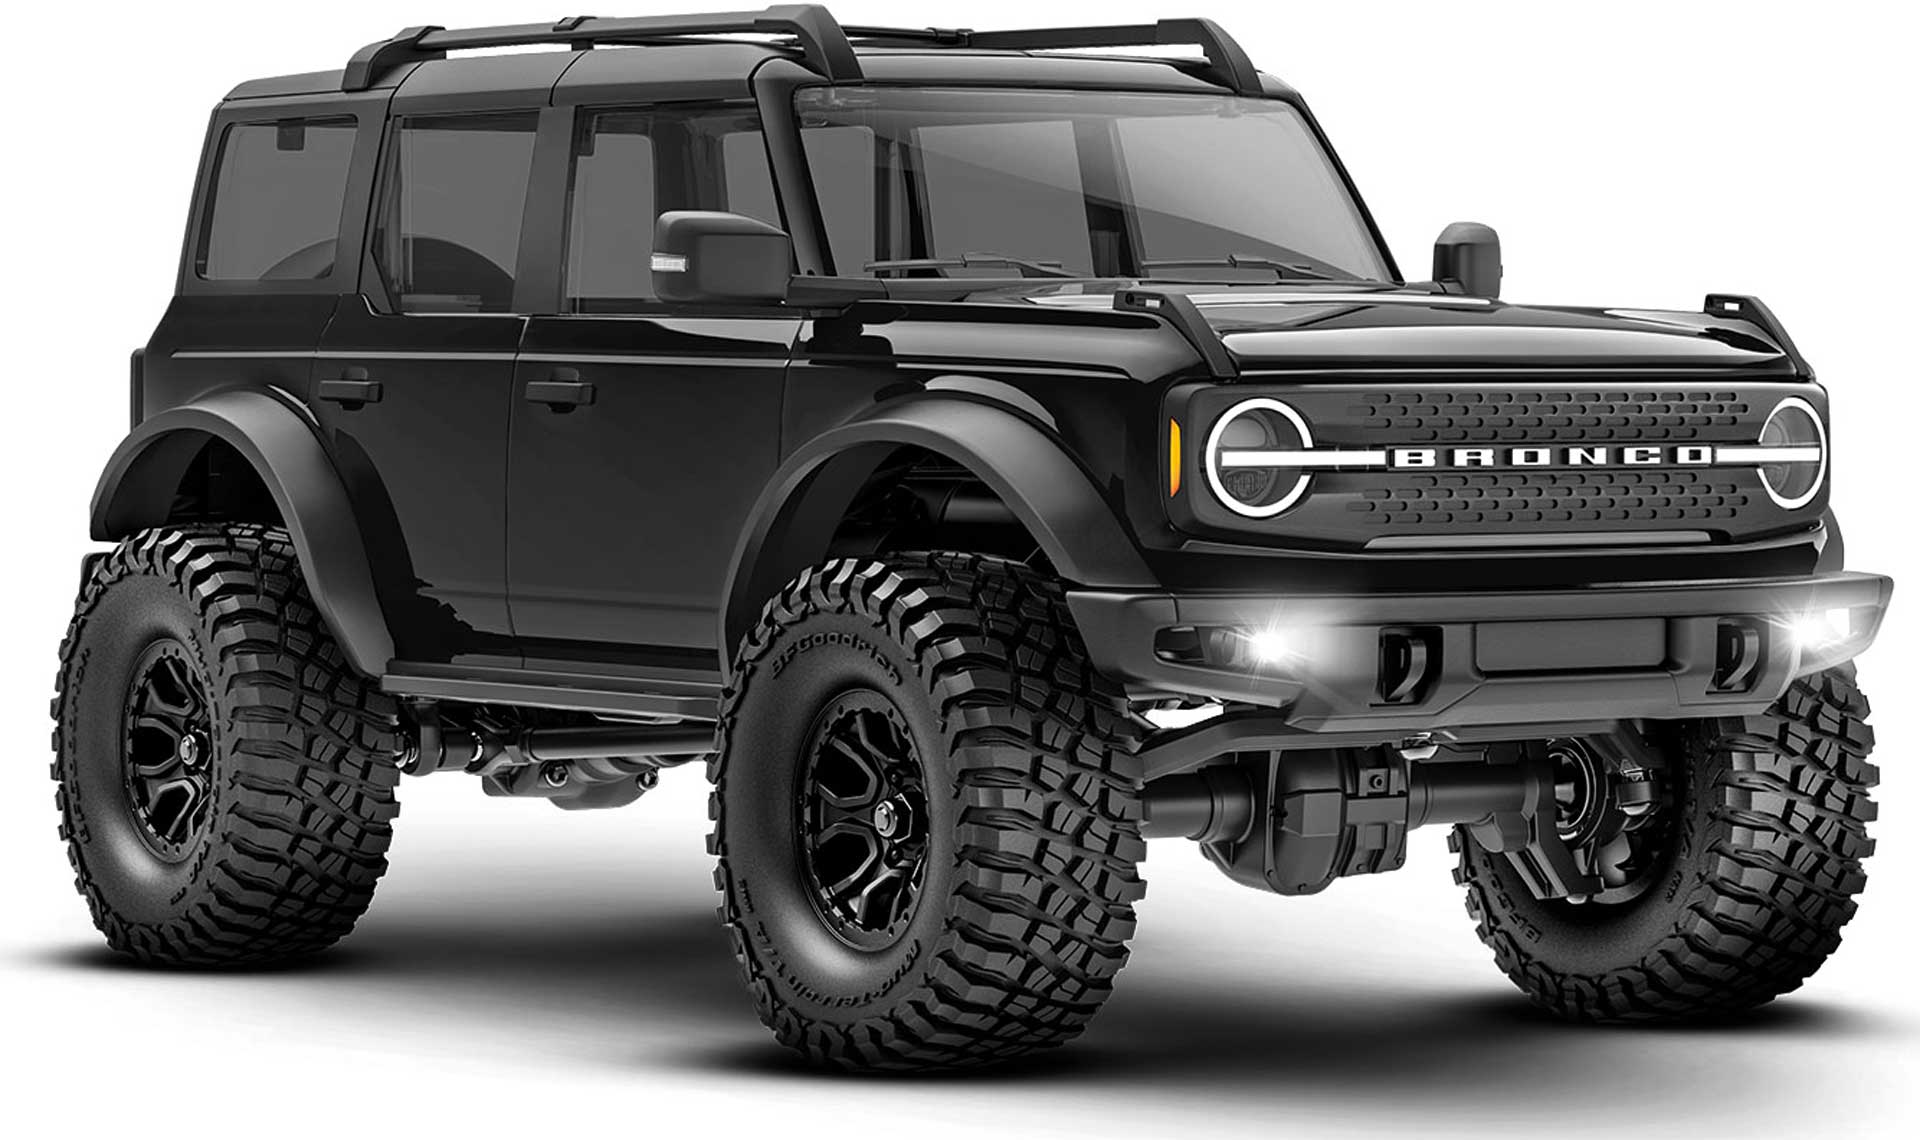 TRAXXAS TRX-4M Ford Bronco black1/18 4WD RTR Scale Crawler with batterie/charger